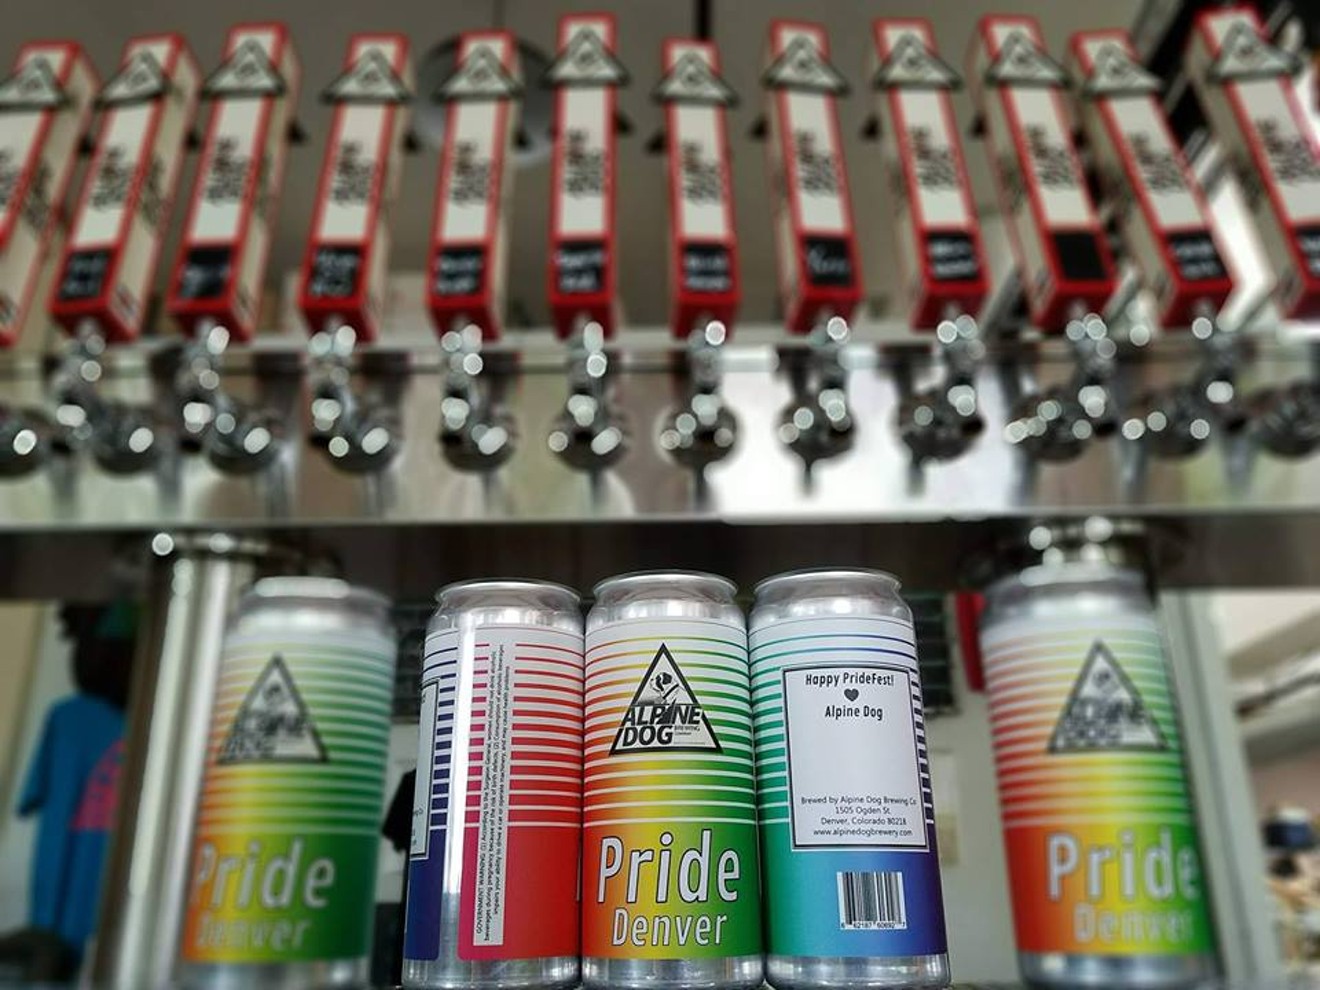 Alpine Dog is serving canned Pride.